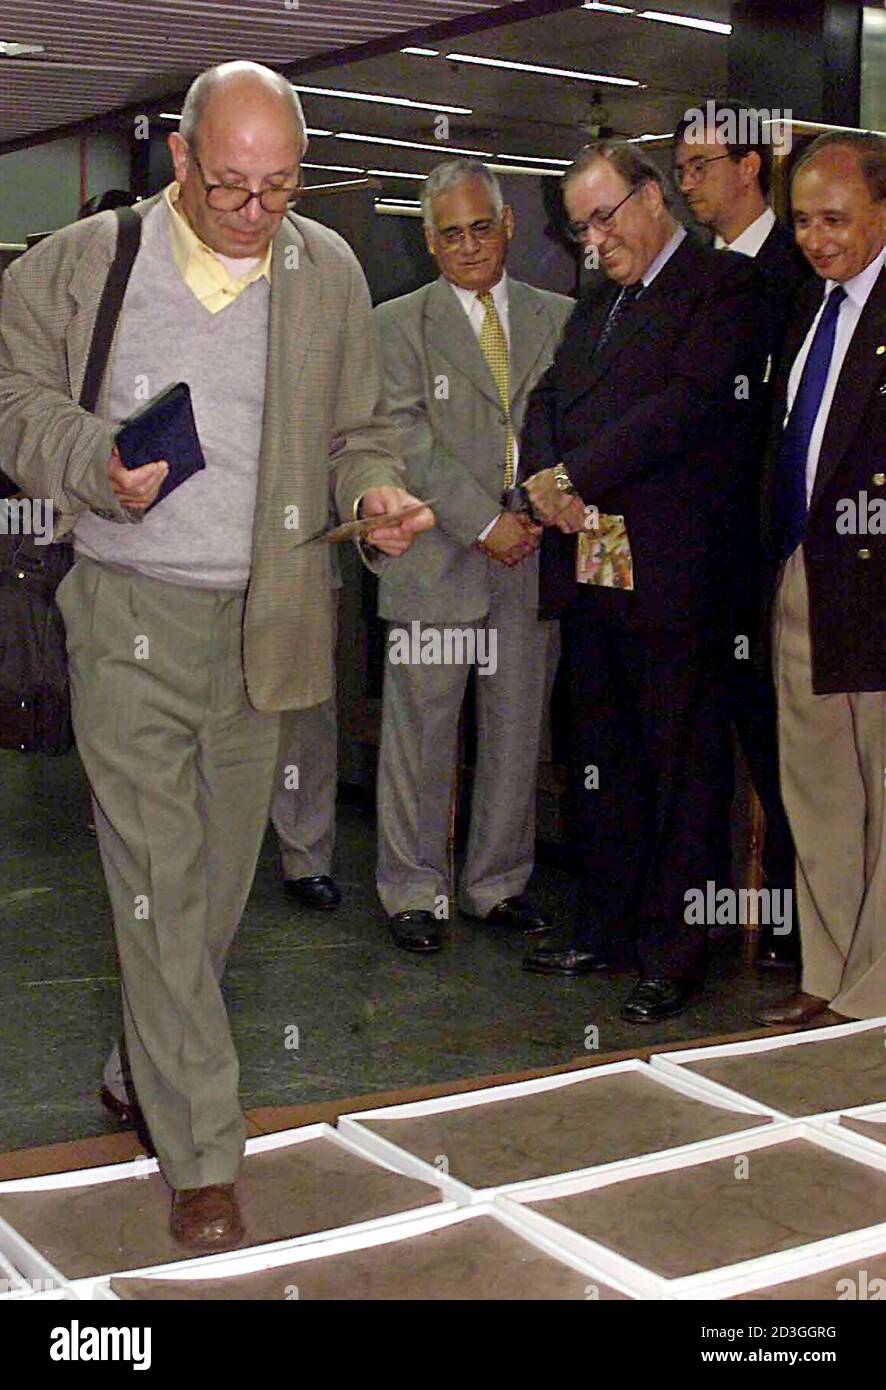 Brazil's Minister of Agriculture Marcos Vinicius Pratini de Moraes (3rd L) watches as a passenger arriving from Portugal walks through an iodine foot bath at the Galeao international airport in Rio de Janeiro March 19, 2001. For the first time, passengers arriving from Europe will be subjected to the preventative footbaths, whose iodine solution should kill micro-organisms that would cause 'foot-and-mouth' disease.  GN/SV Stock Photo